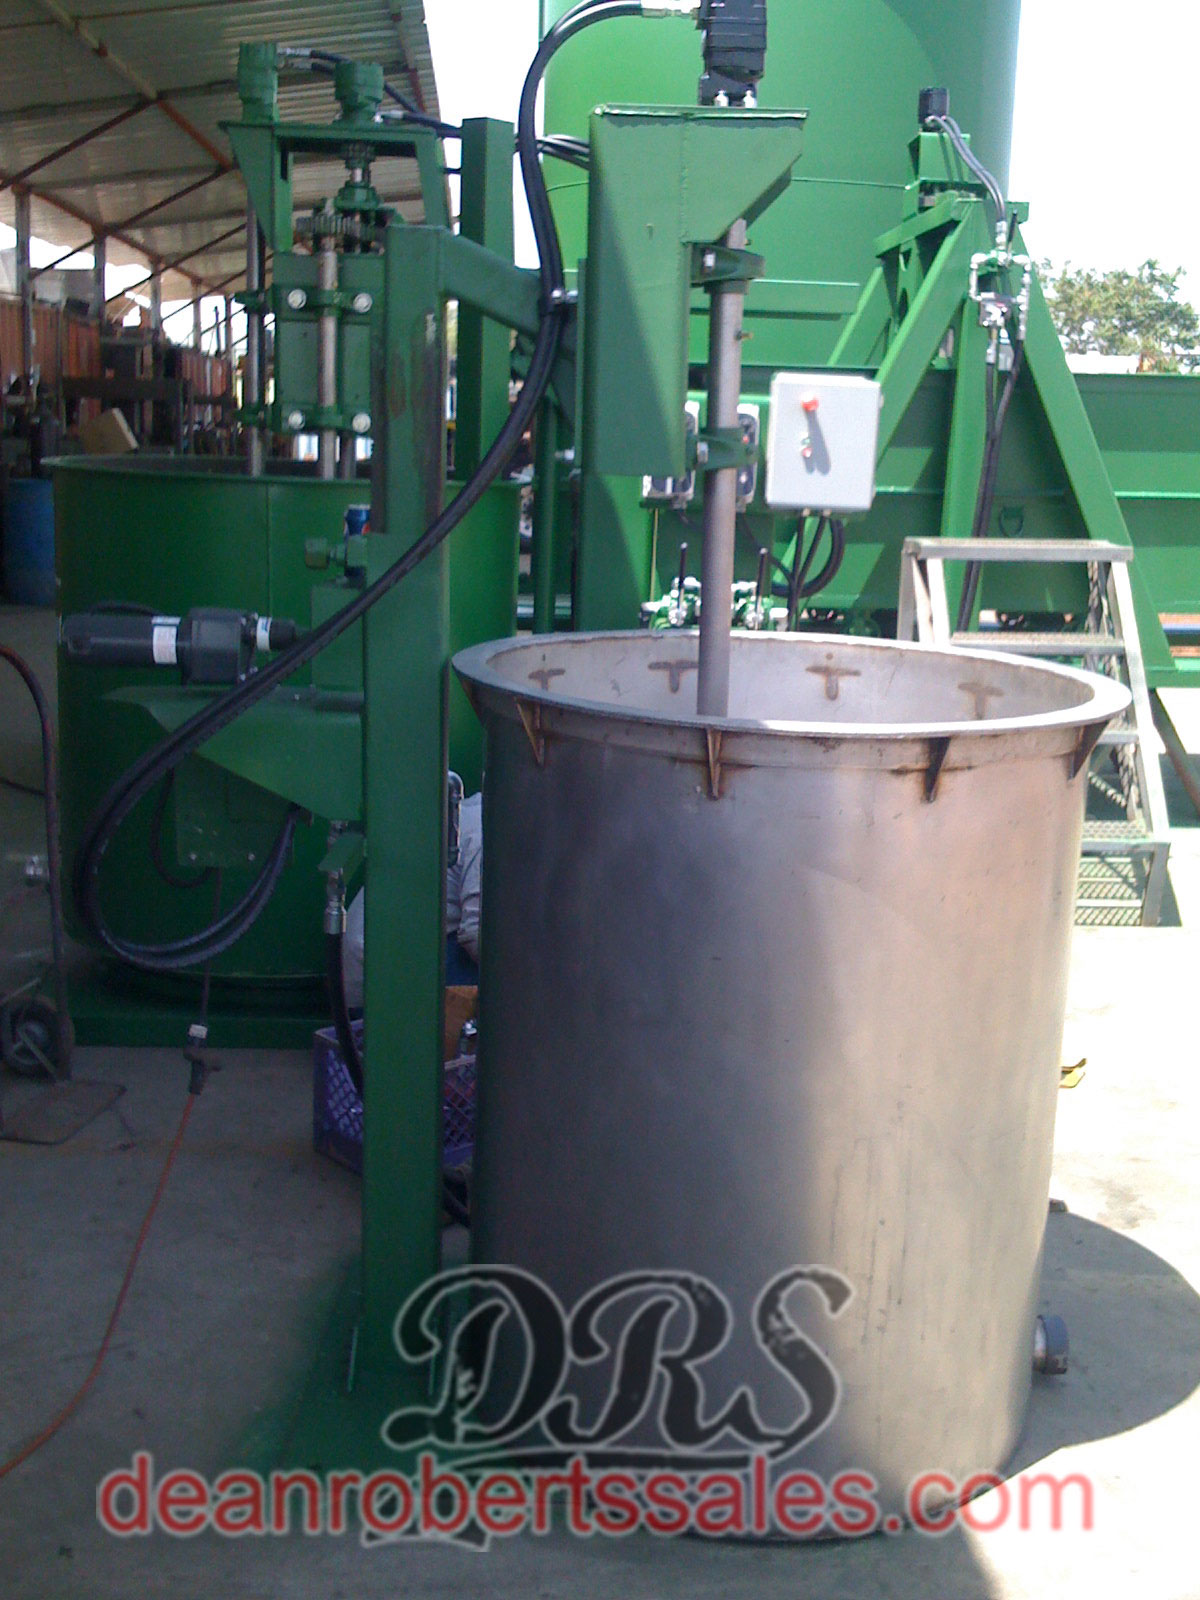 CUSTOM SPECIALTY SEALCOAT TANKS TRUCKS AND HELICAL MIXERS BY DEAN ROBERTS SALES.